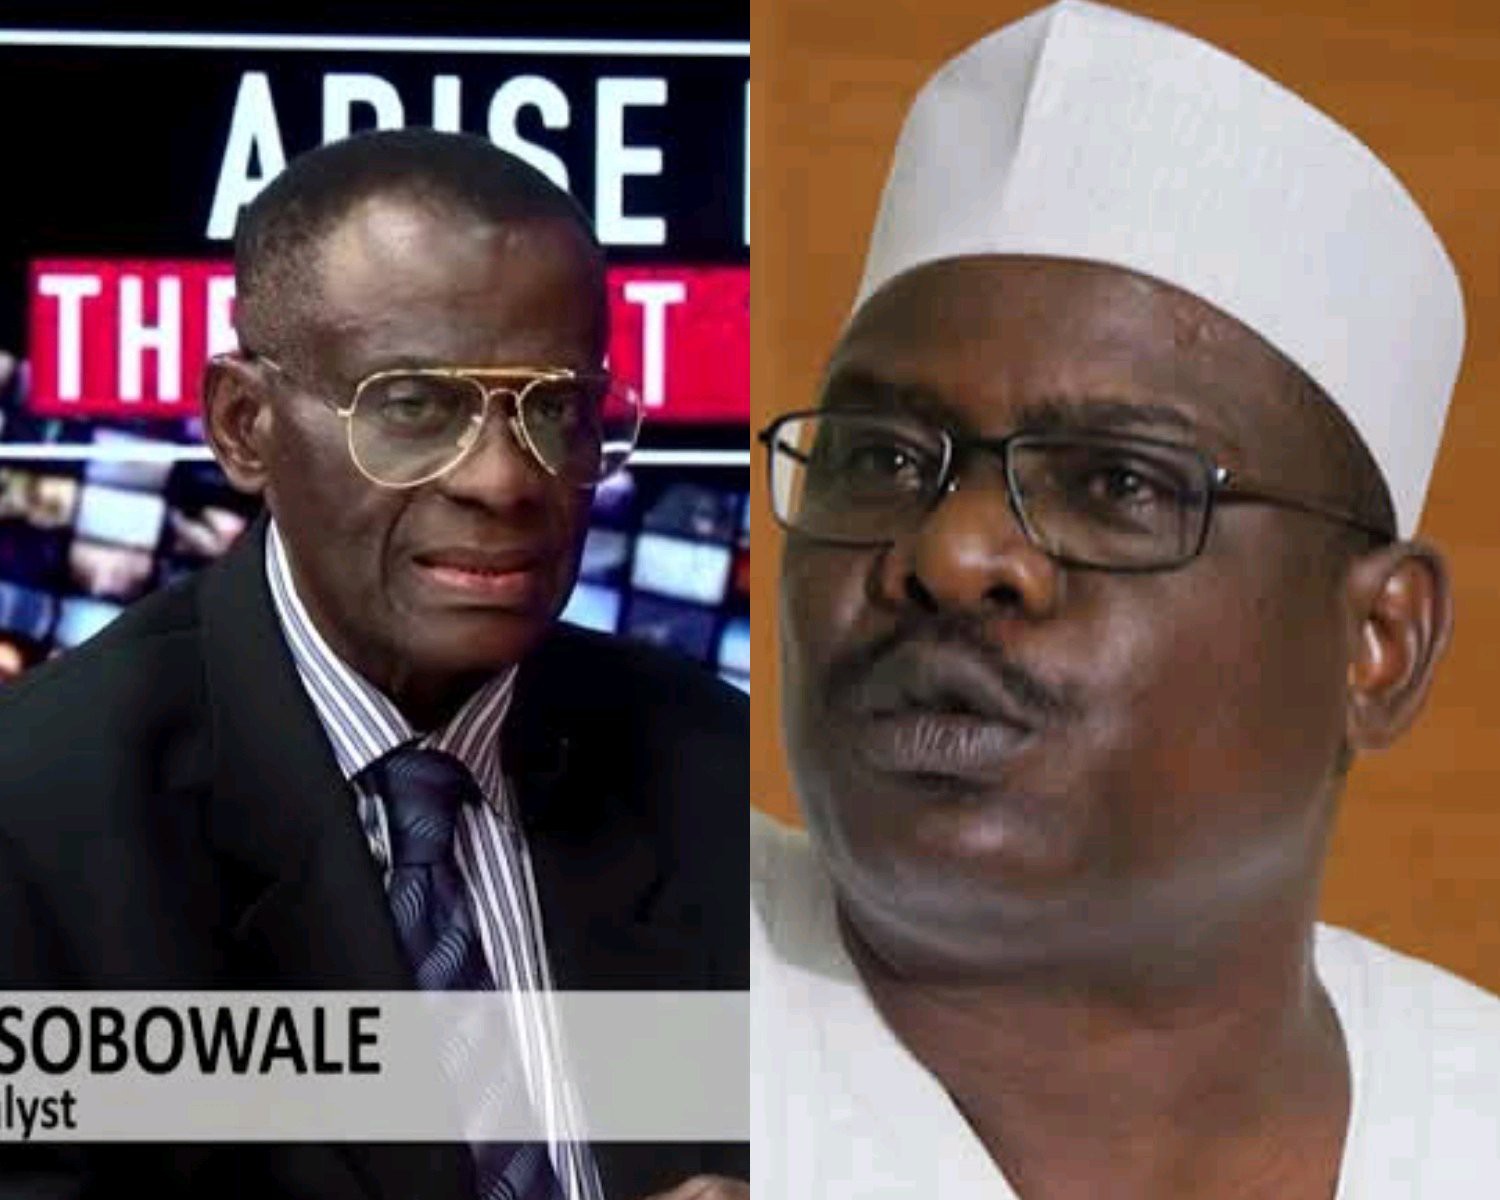 Sobowole "What Ndume was trying to say was that the north will not vote for Tinubu again"